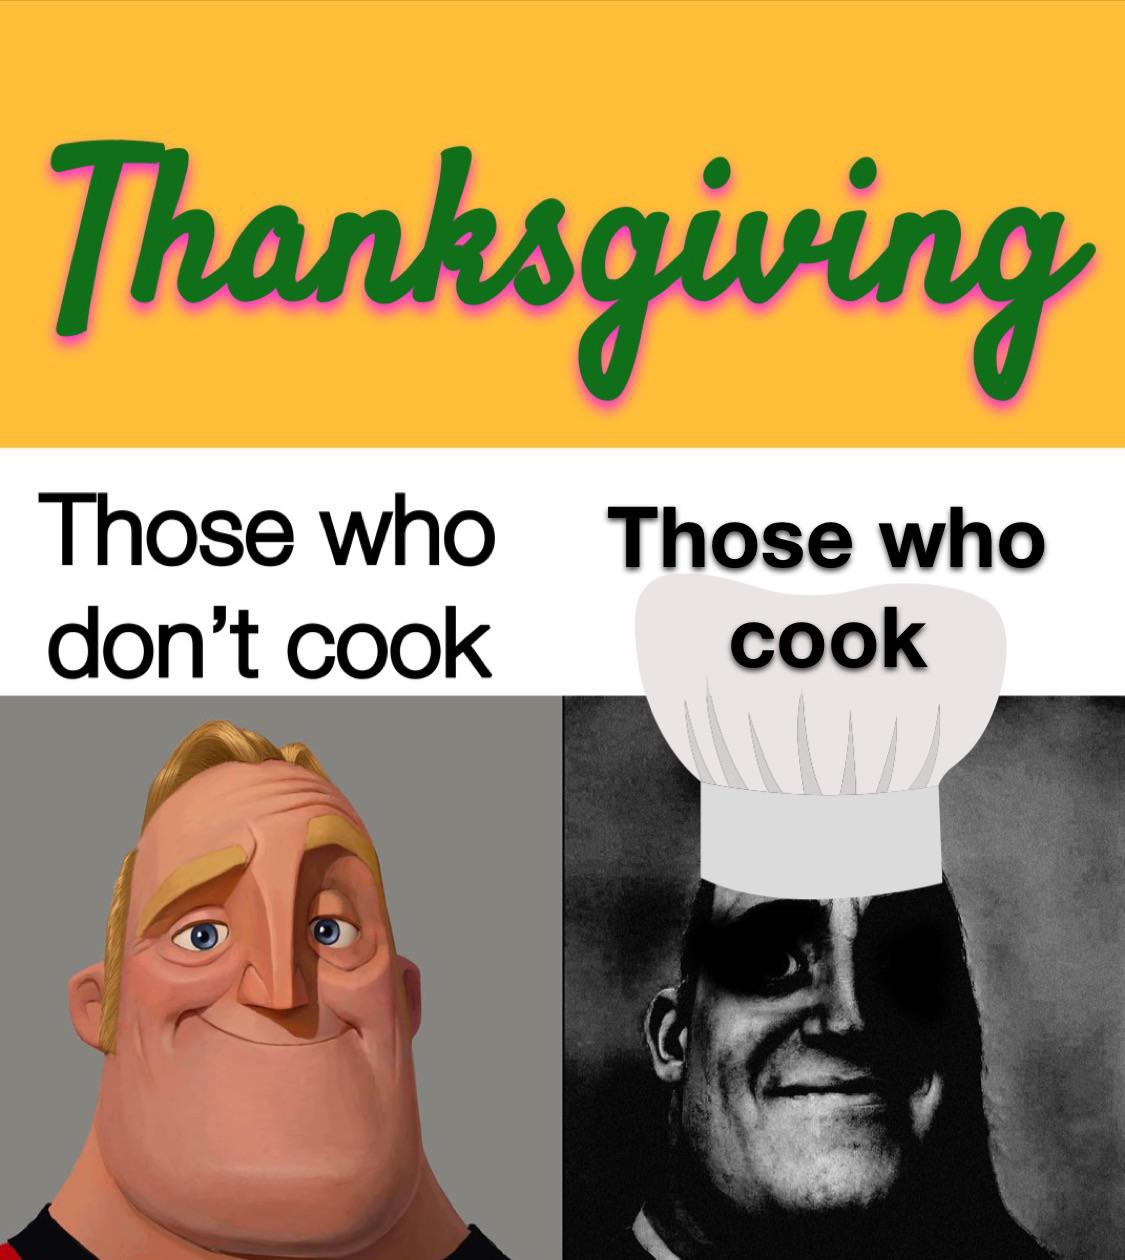 fresh memes - teenager post - Thanksgiving Those who don't cook Those who cook